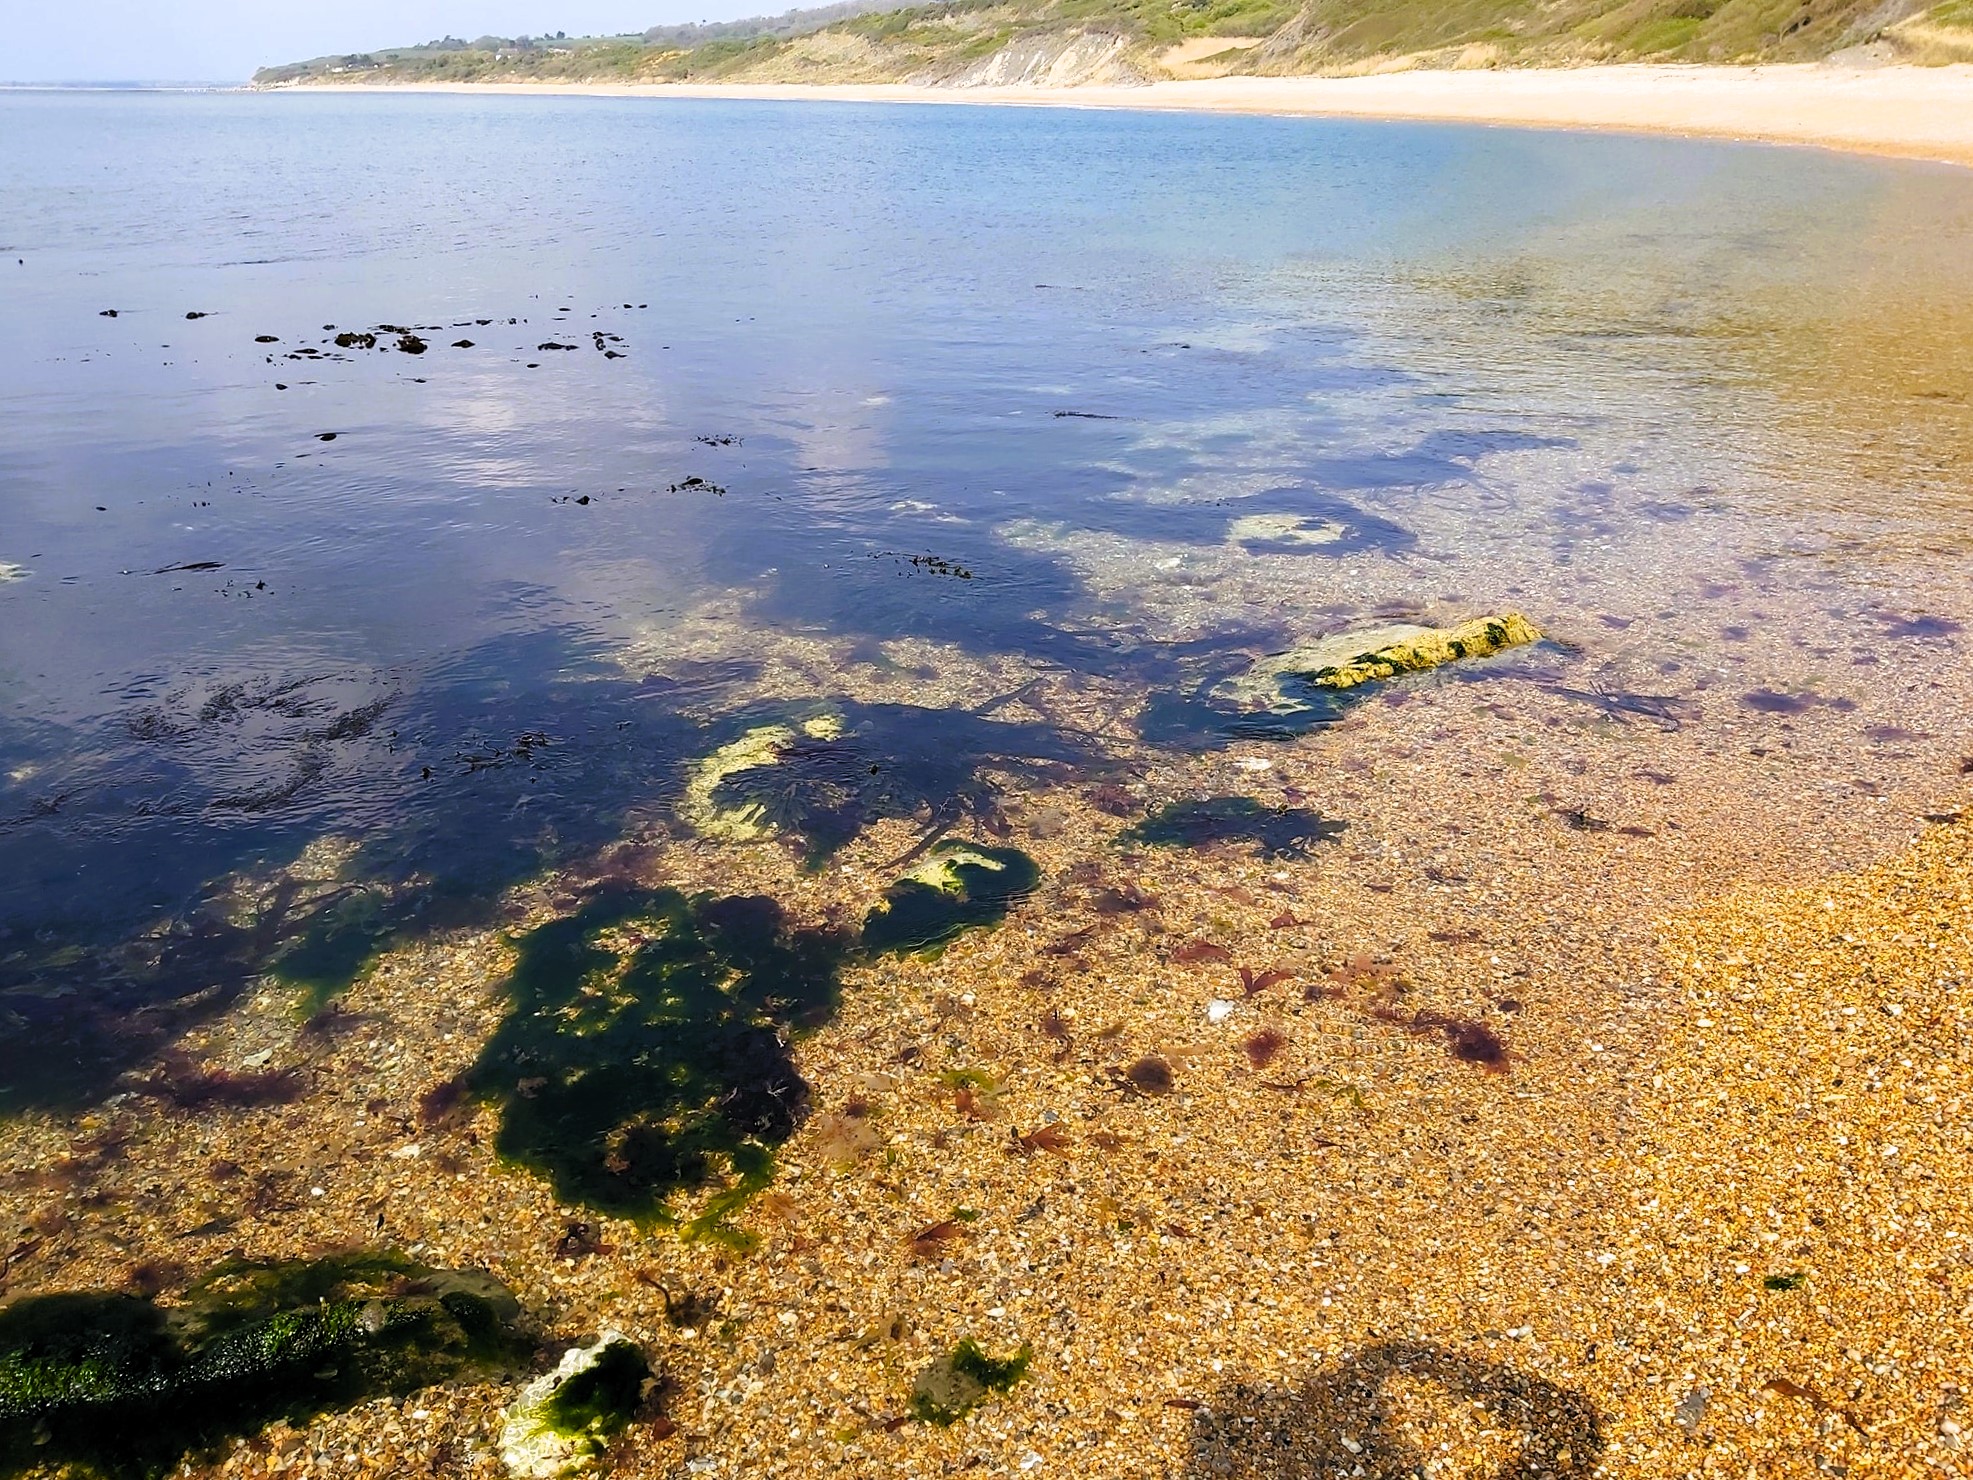 The clear waters of Ringstead beach, Dorset, England, with seaweed clearly visible.